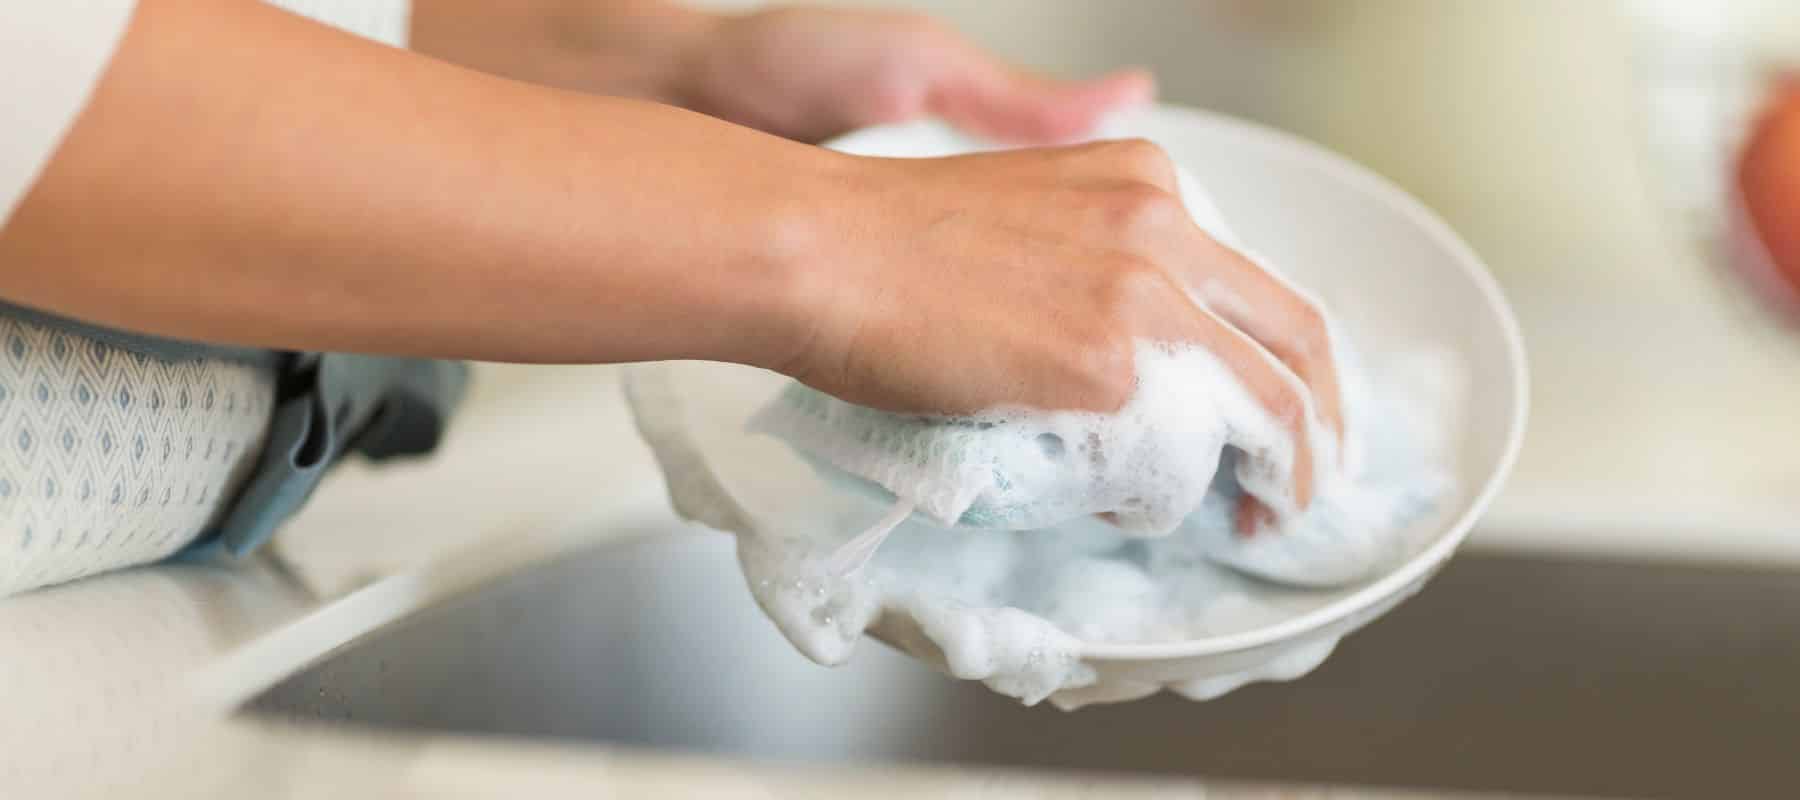 Cleaning a dish with soap and water